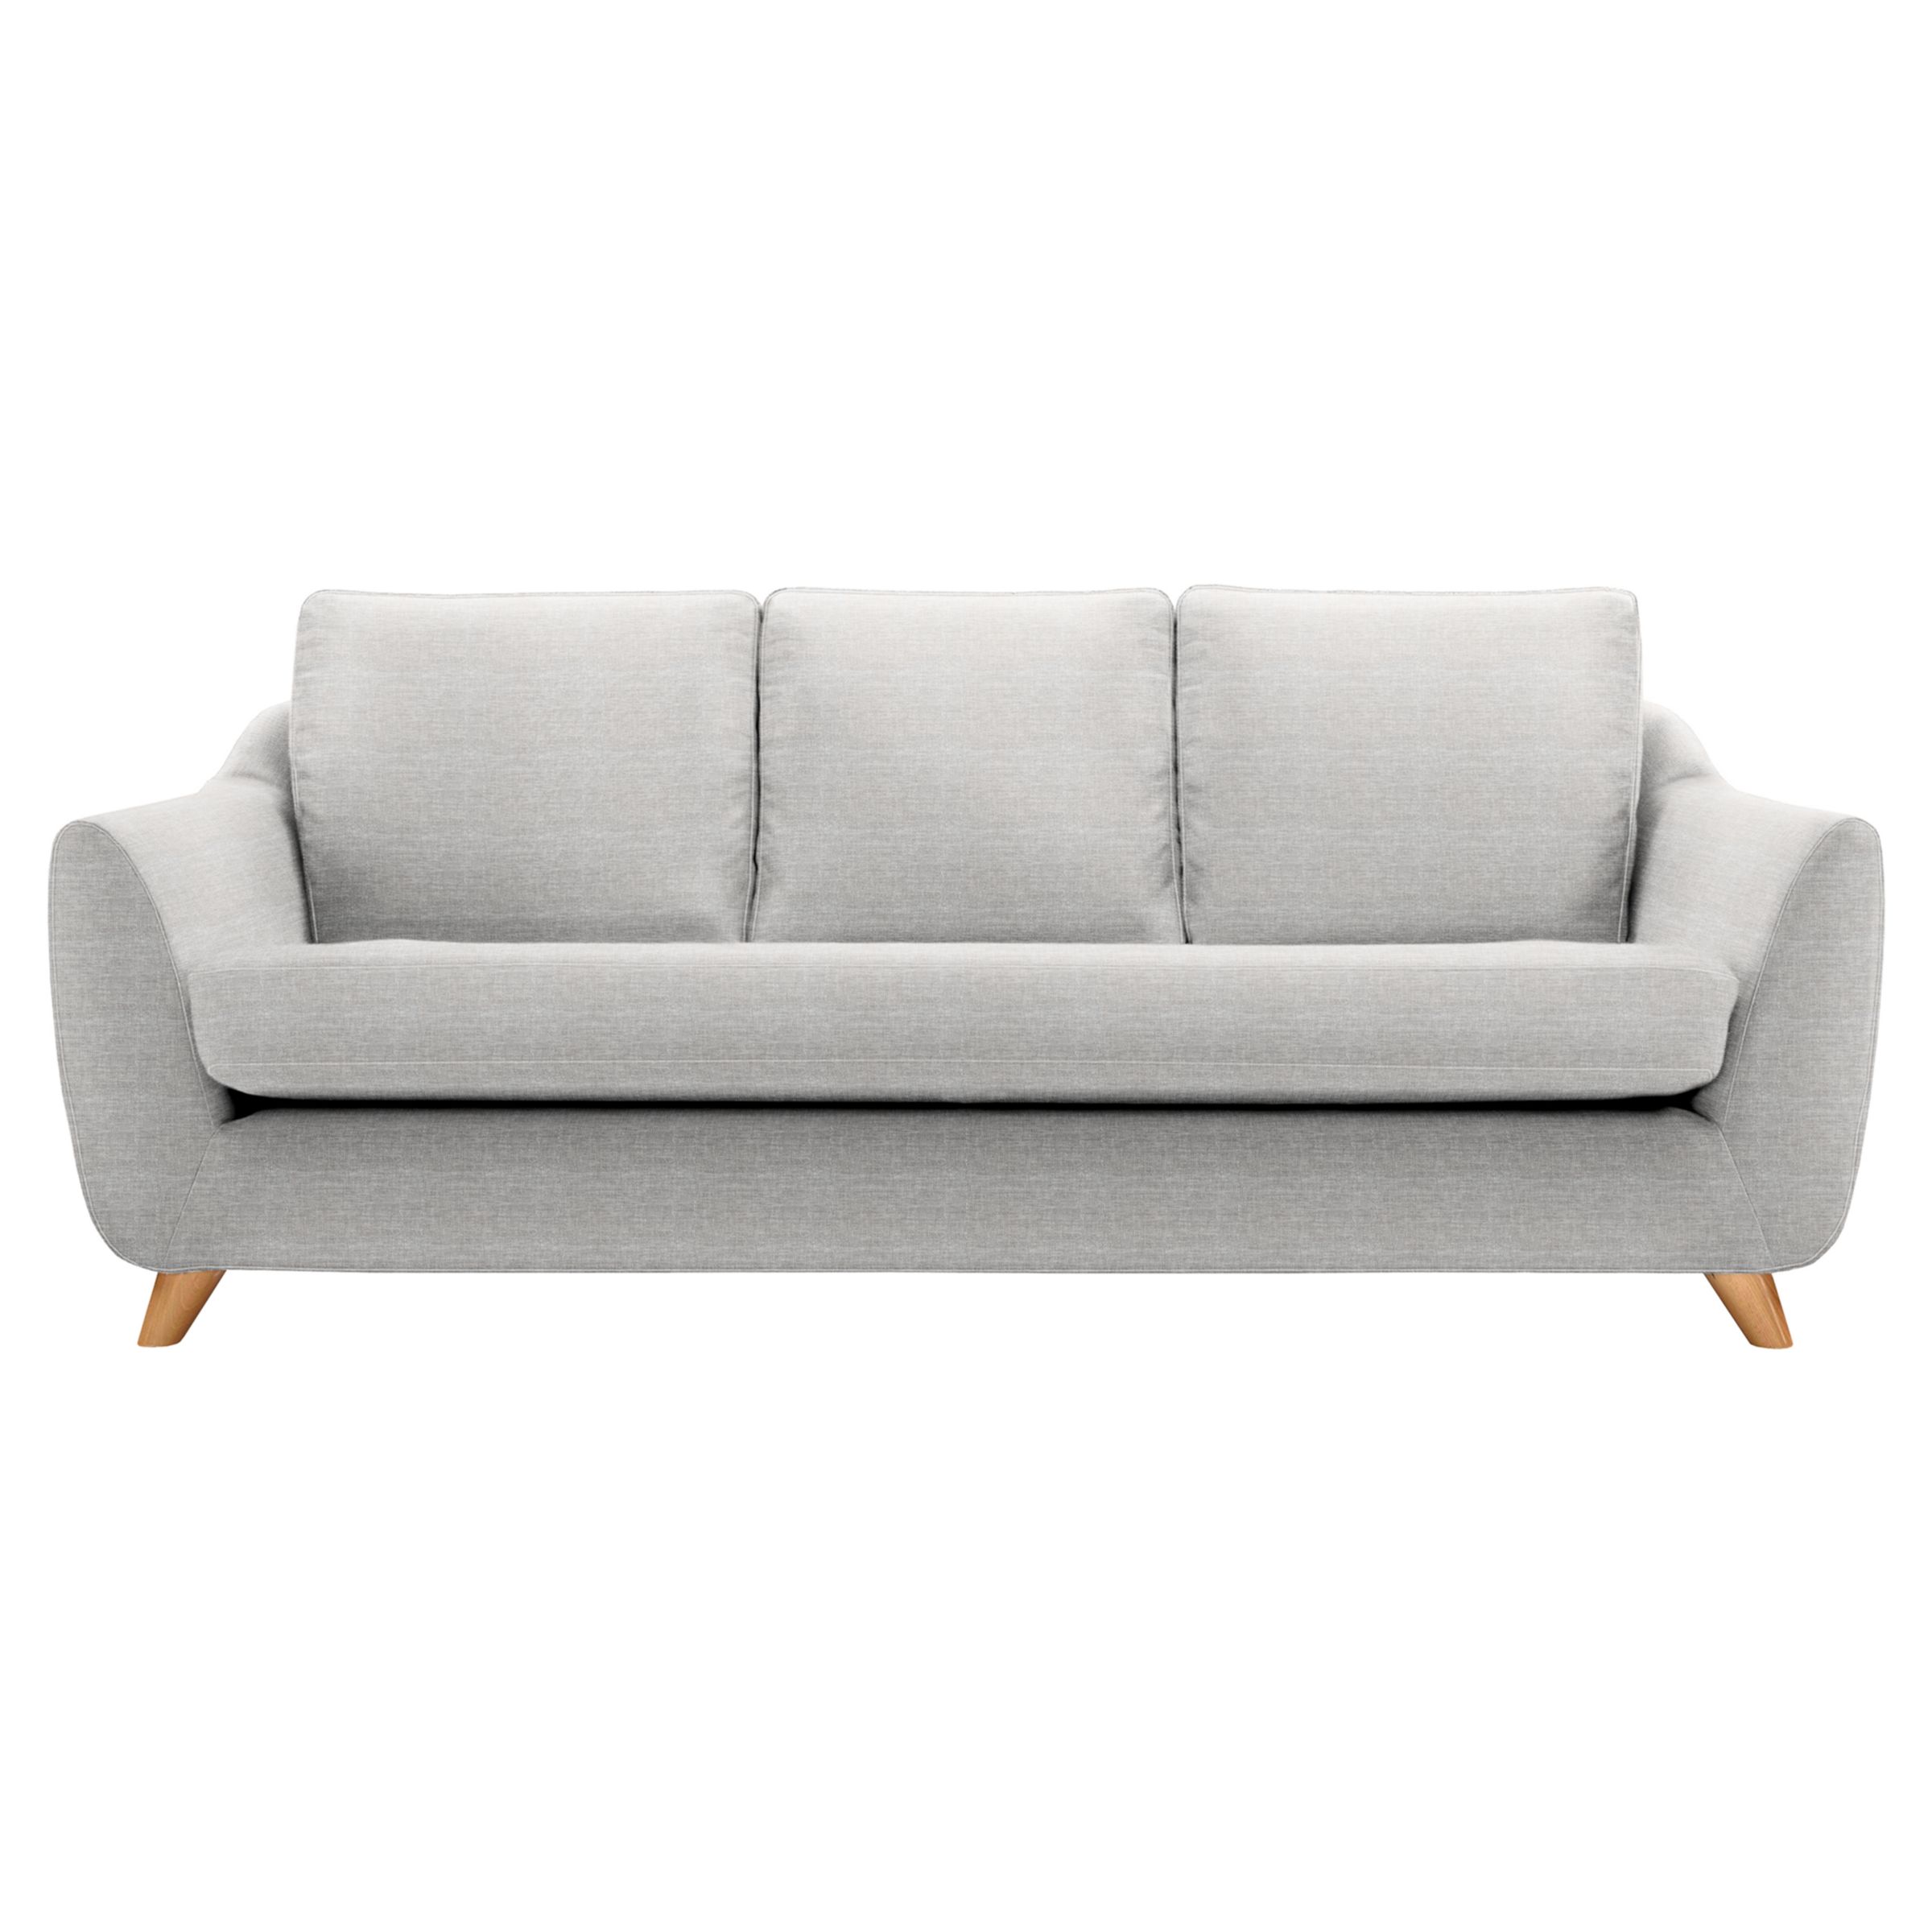 G Plan Vintage The Sixty Seven Large 3 Seater Sofa, Marl Grey